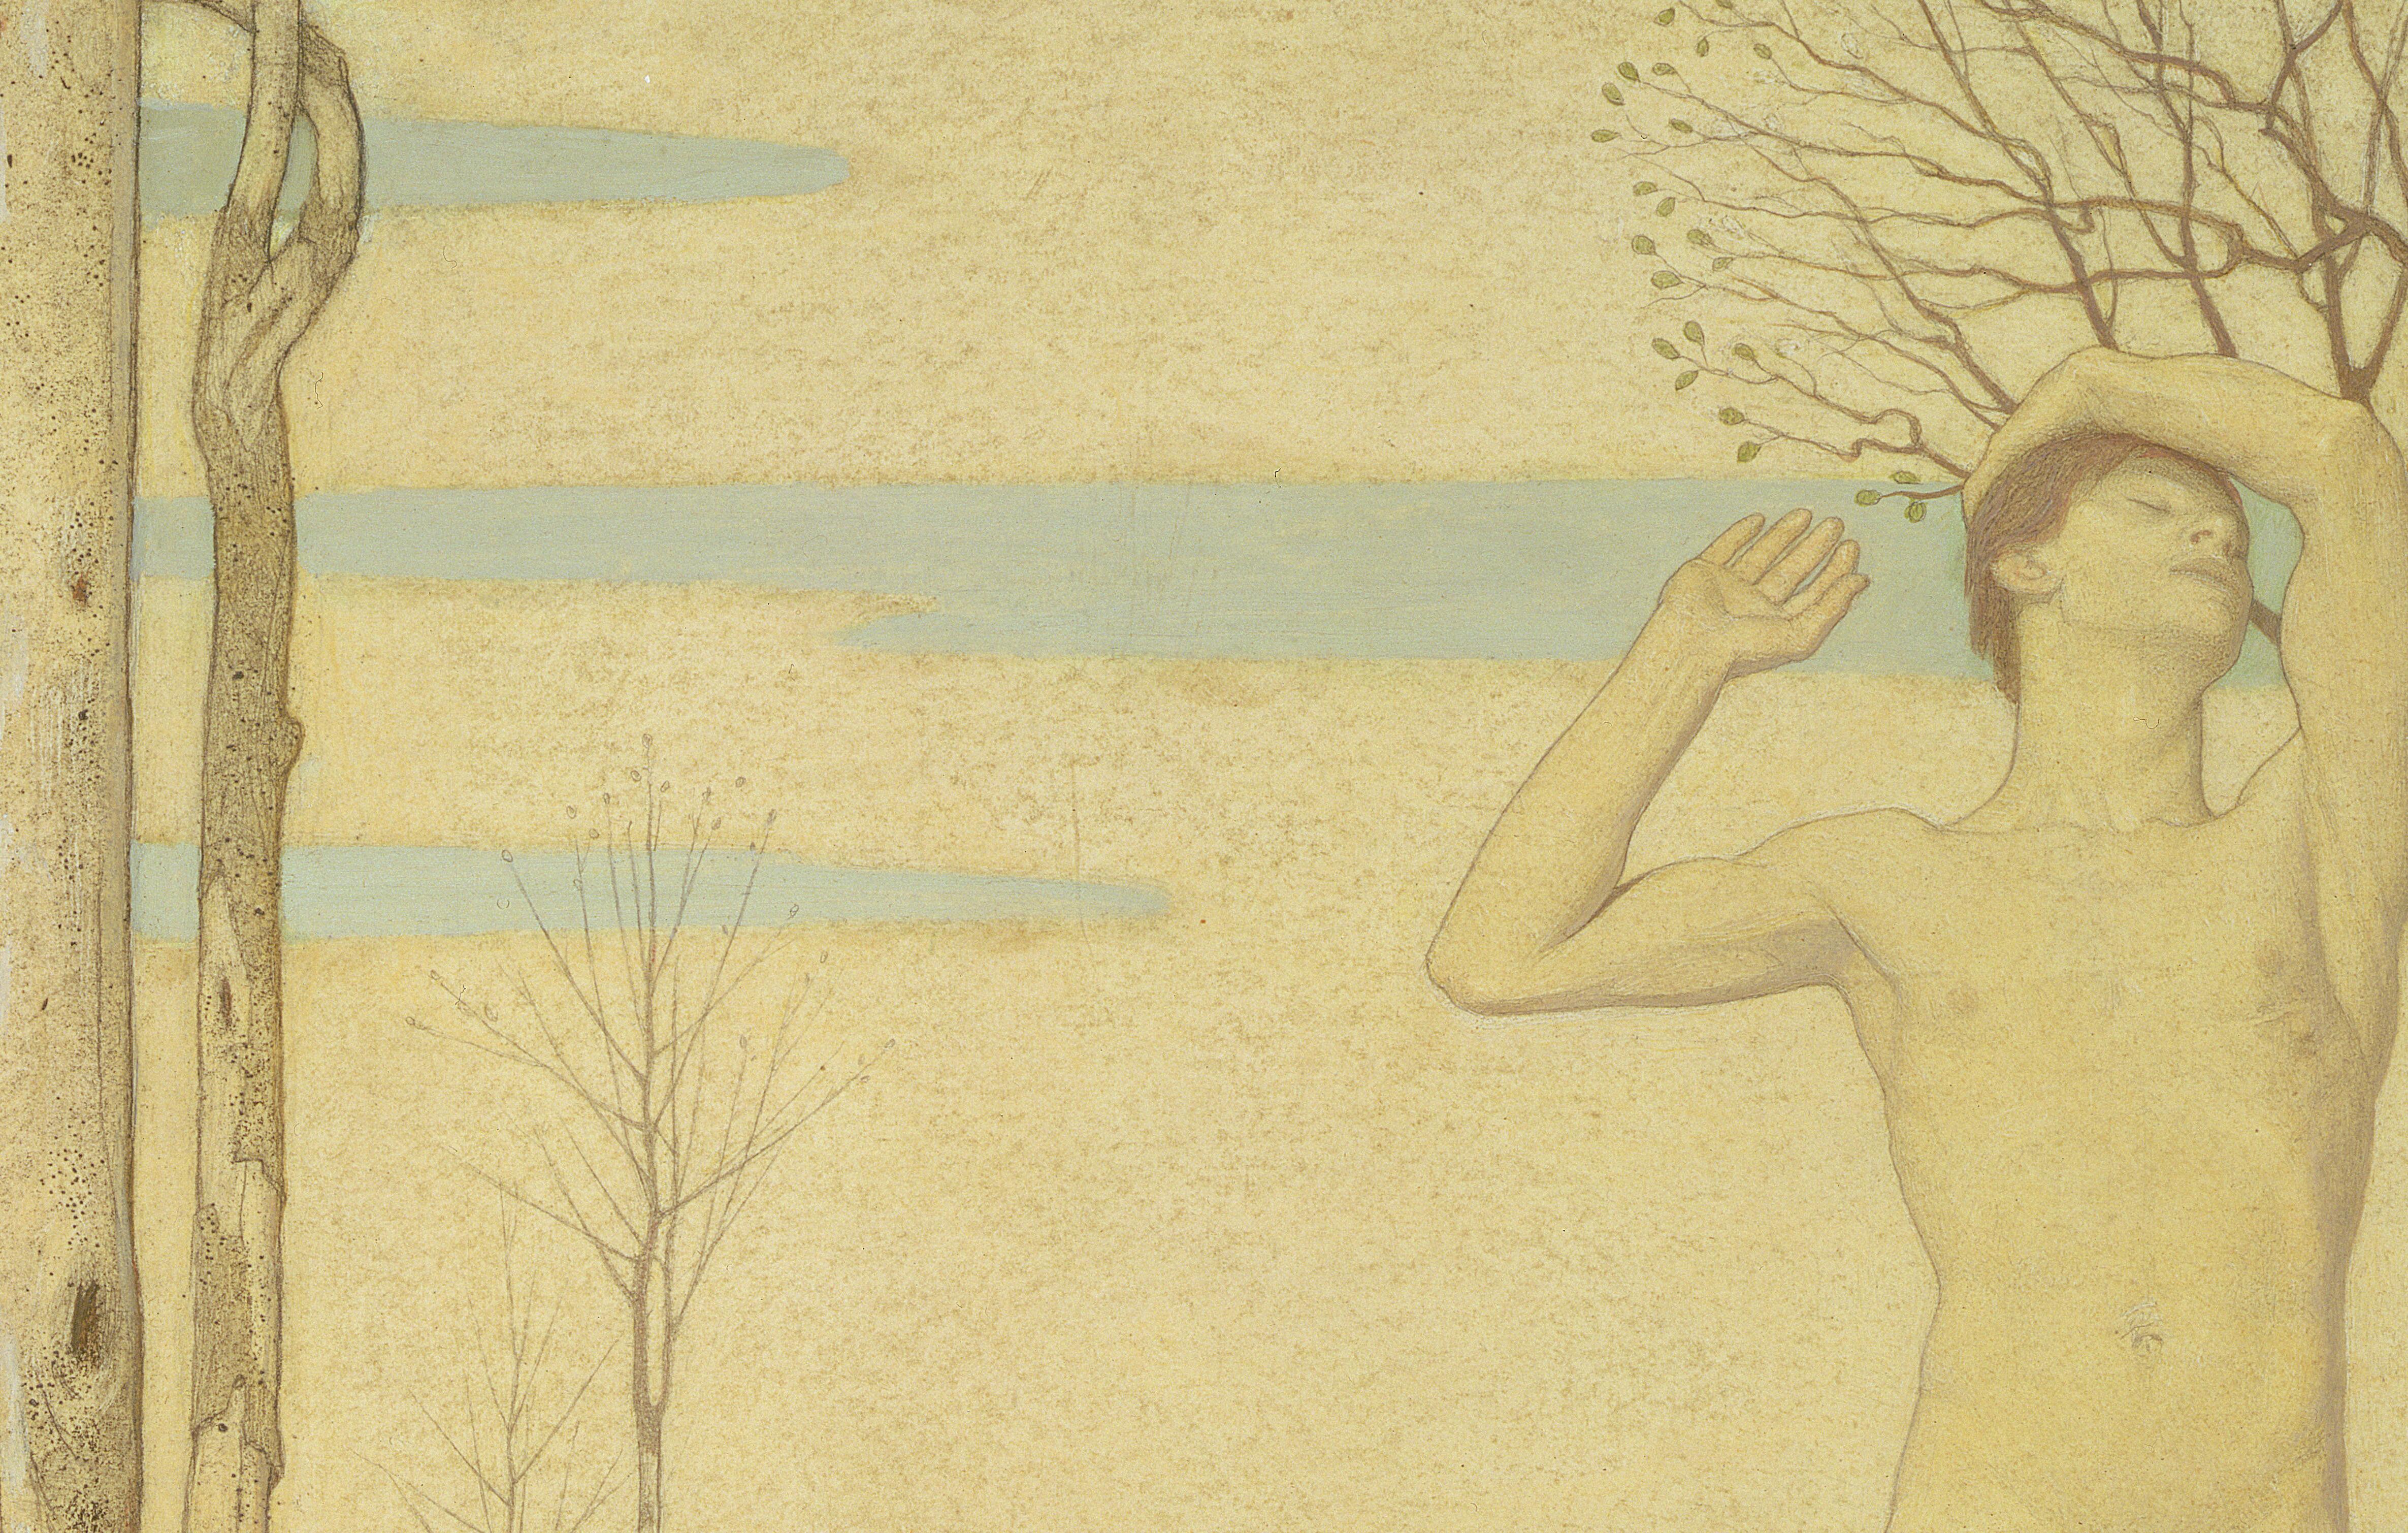 Frederick Cayley Robinson, <i>The Youth</i>, 1923, charcoal, watercolour, gouache, pastel, oil, and pencil on panel, 46.3 x 62.2 cm. Private Collection. Digital image courtesy of Fine Art Society (All rights reserved).